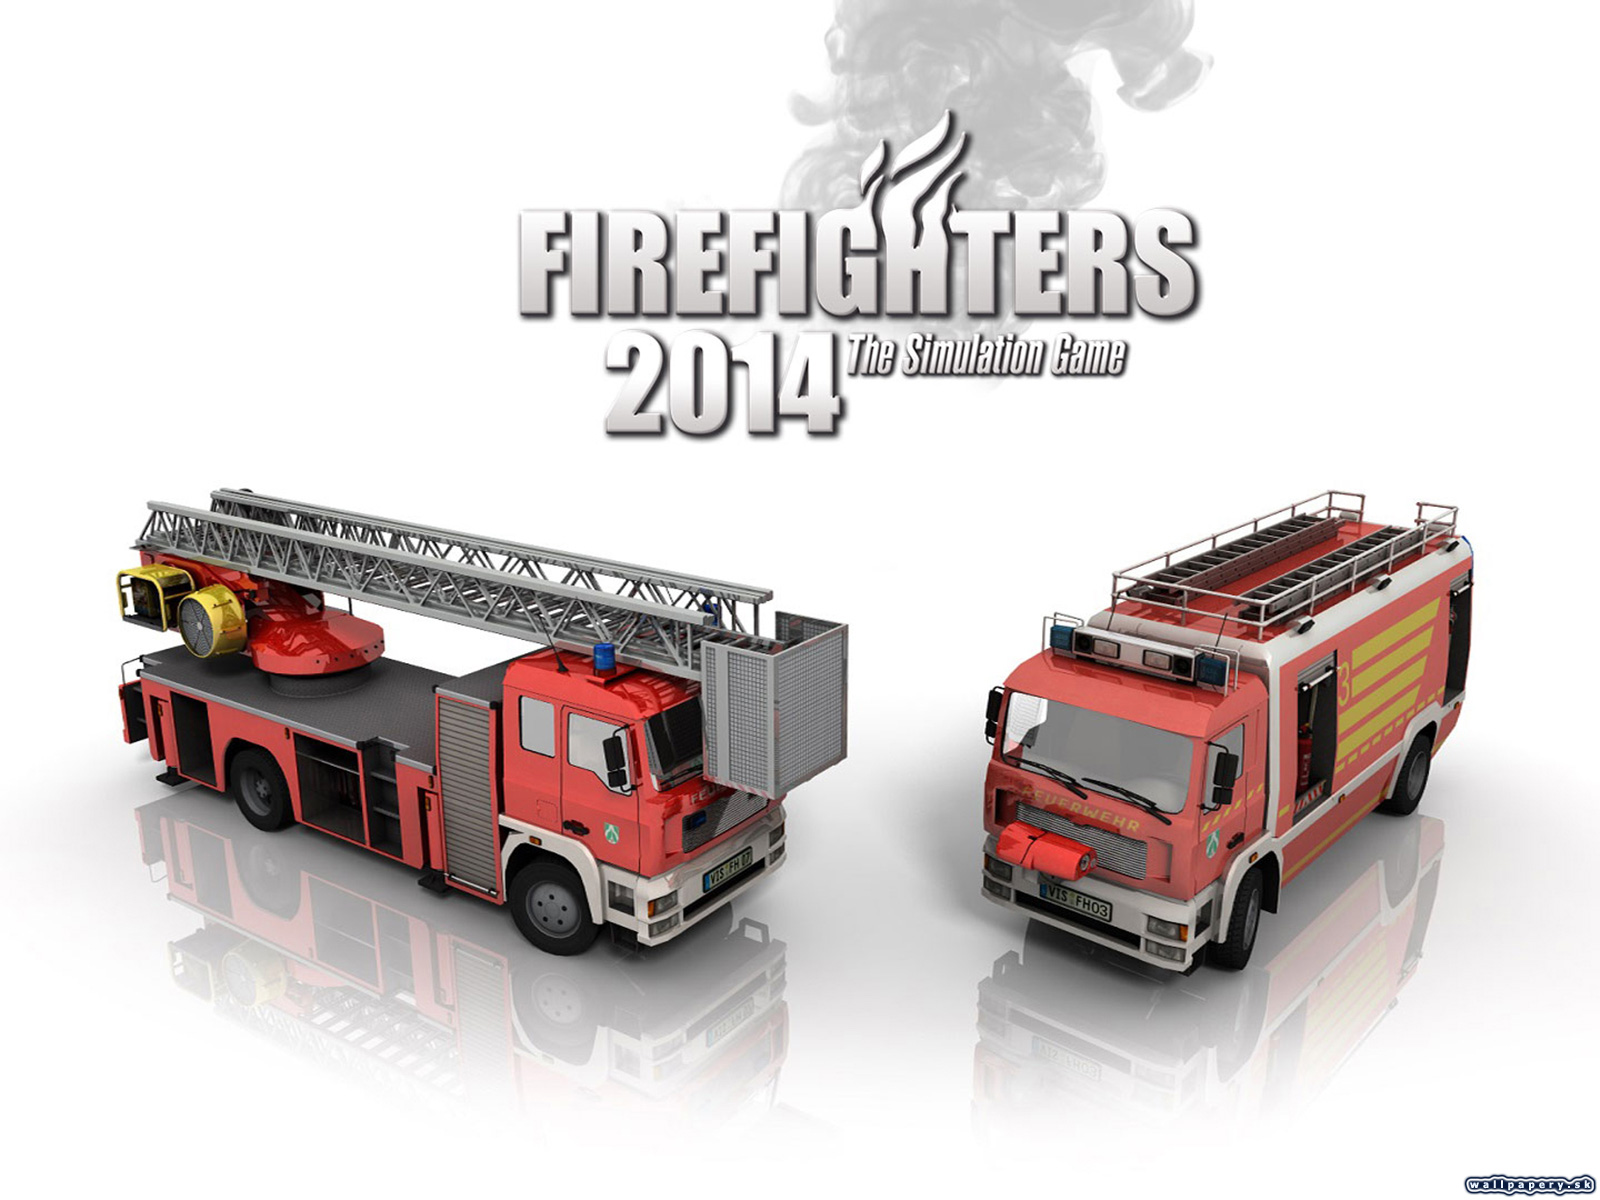 Firefighters 2014: The Simulation Game - wallpaper 2